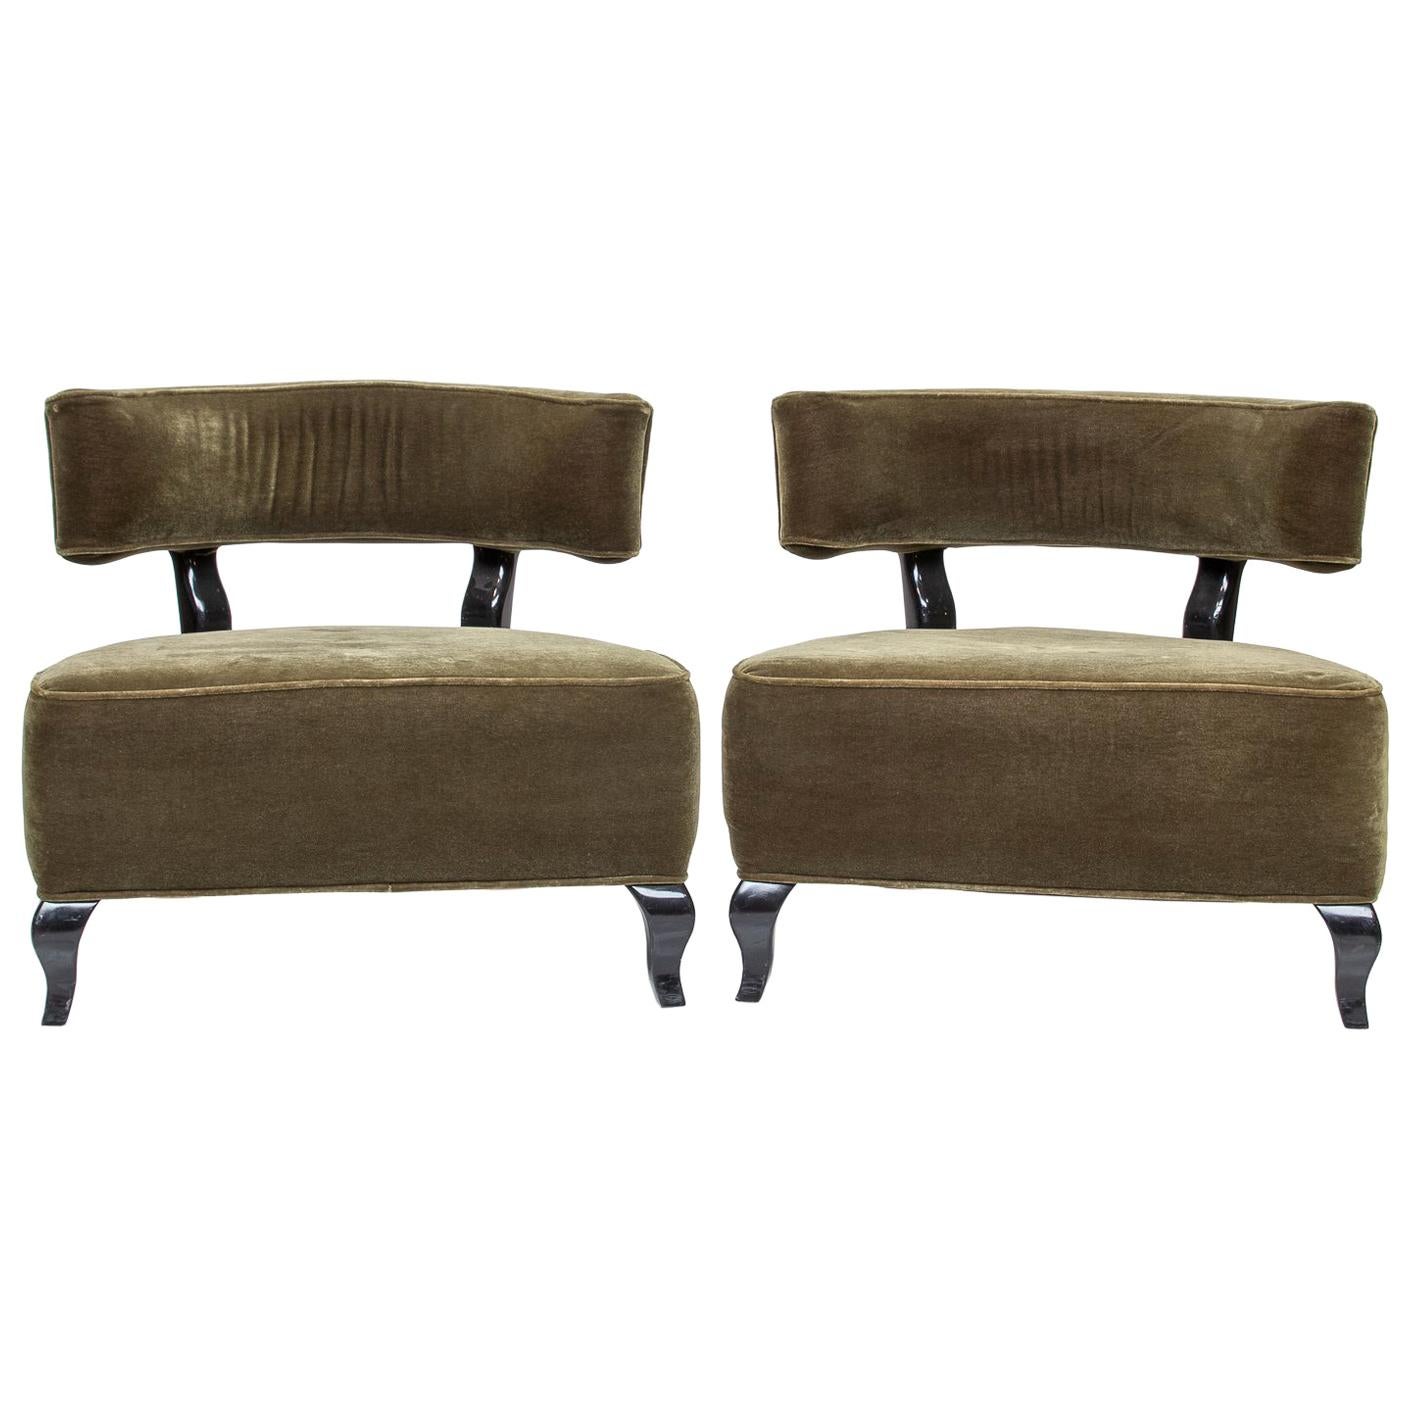 Pair of Large Deco Chairs